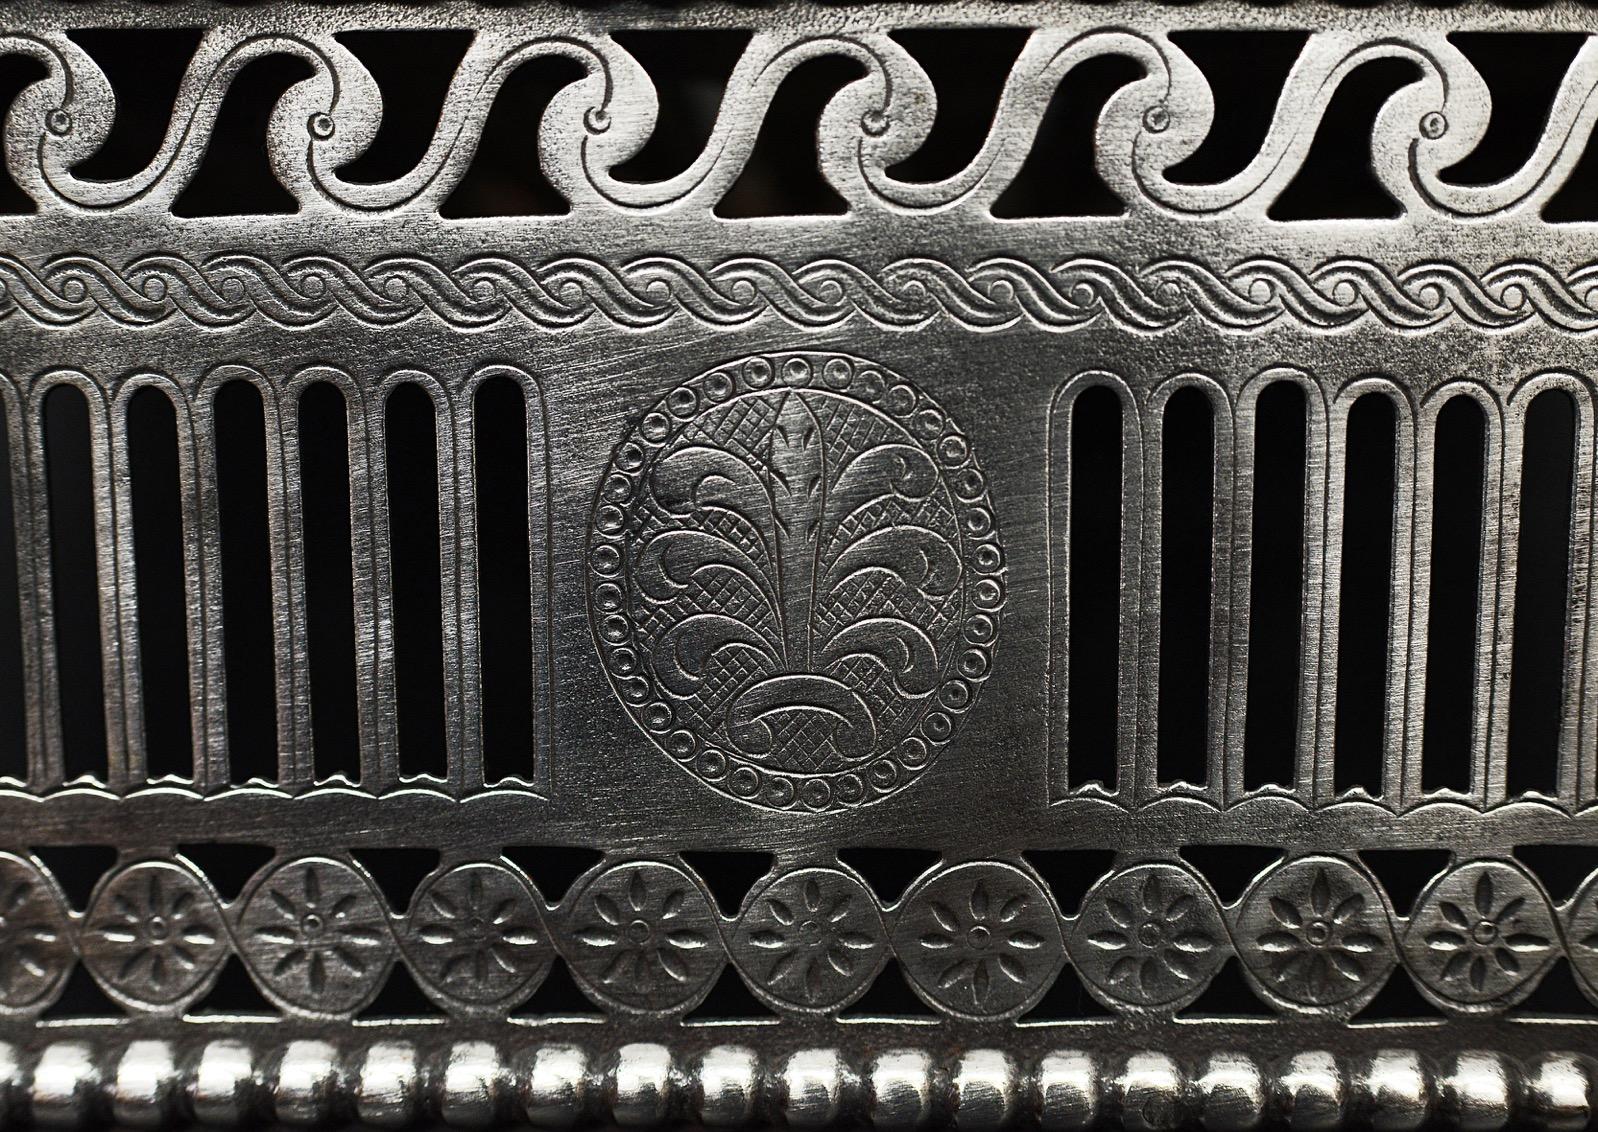 English Unusual Polished Steel Firegrate For Sale